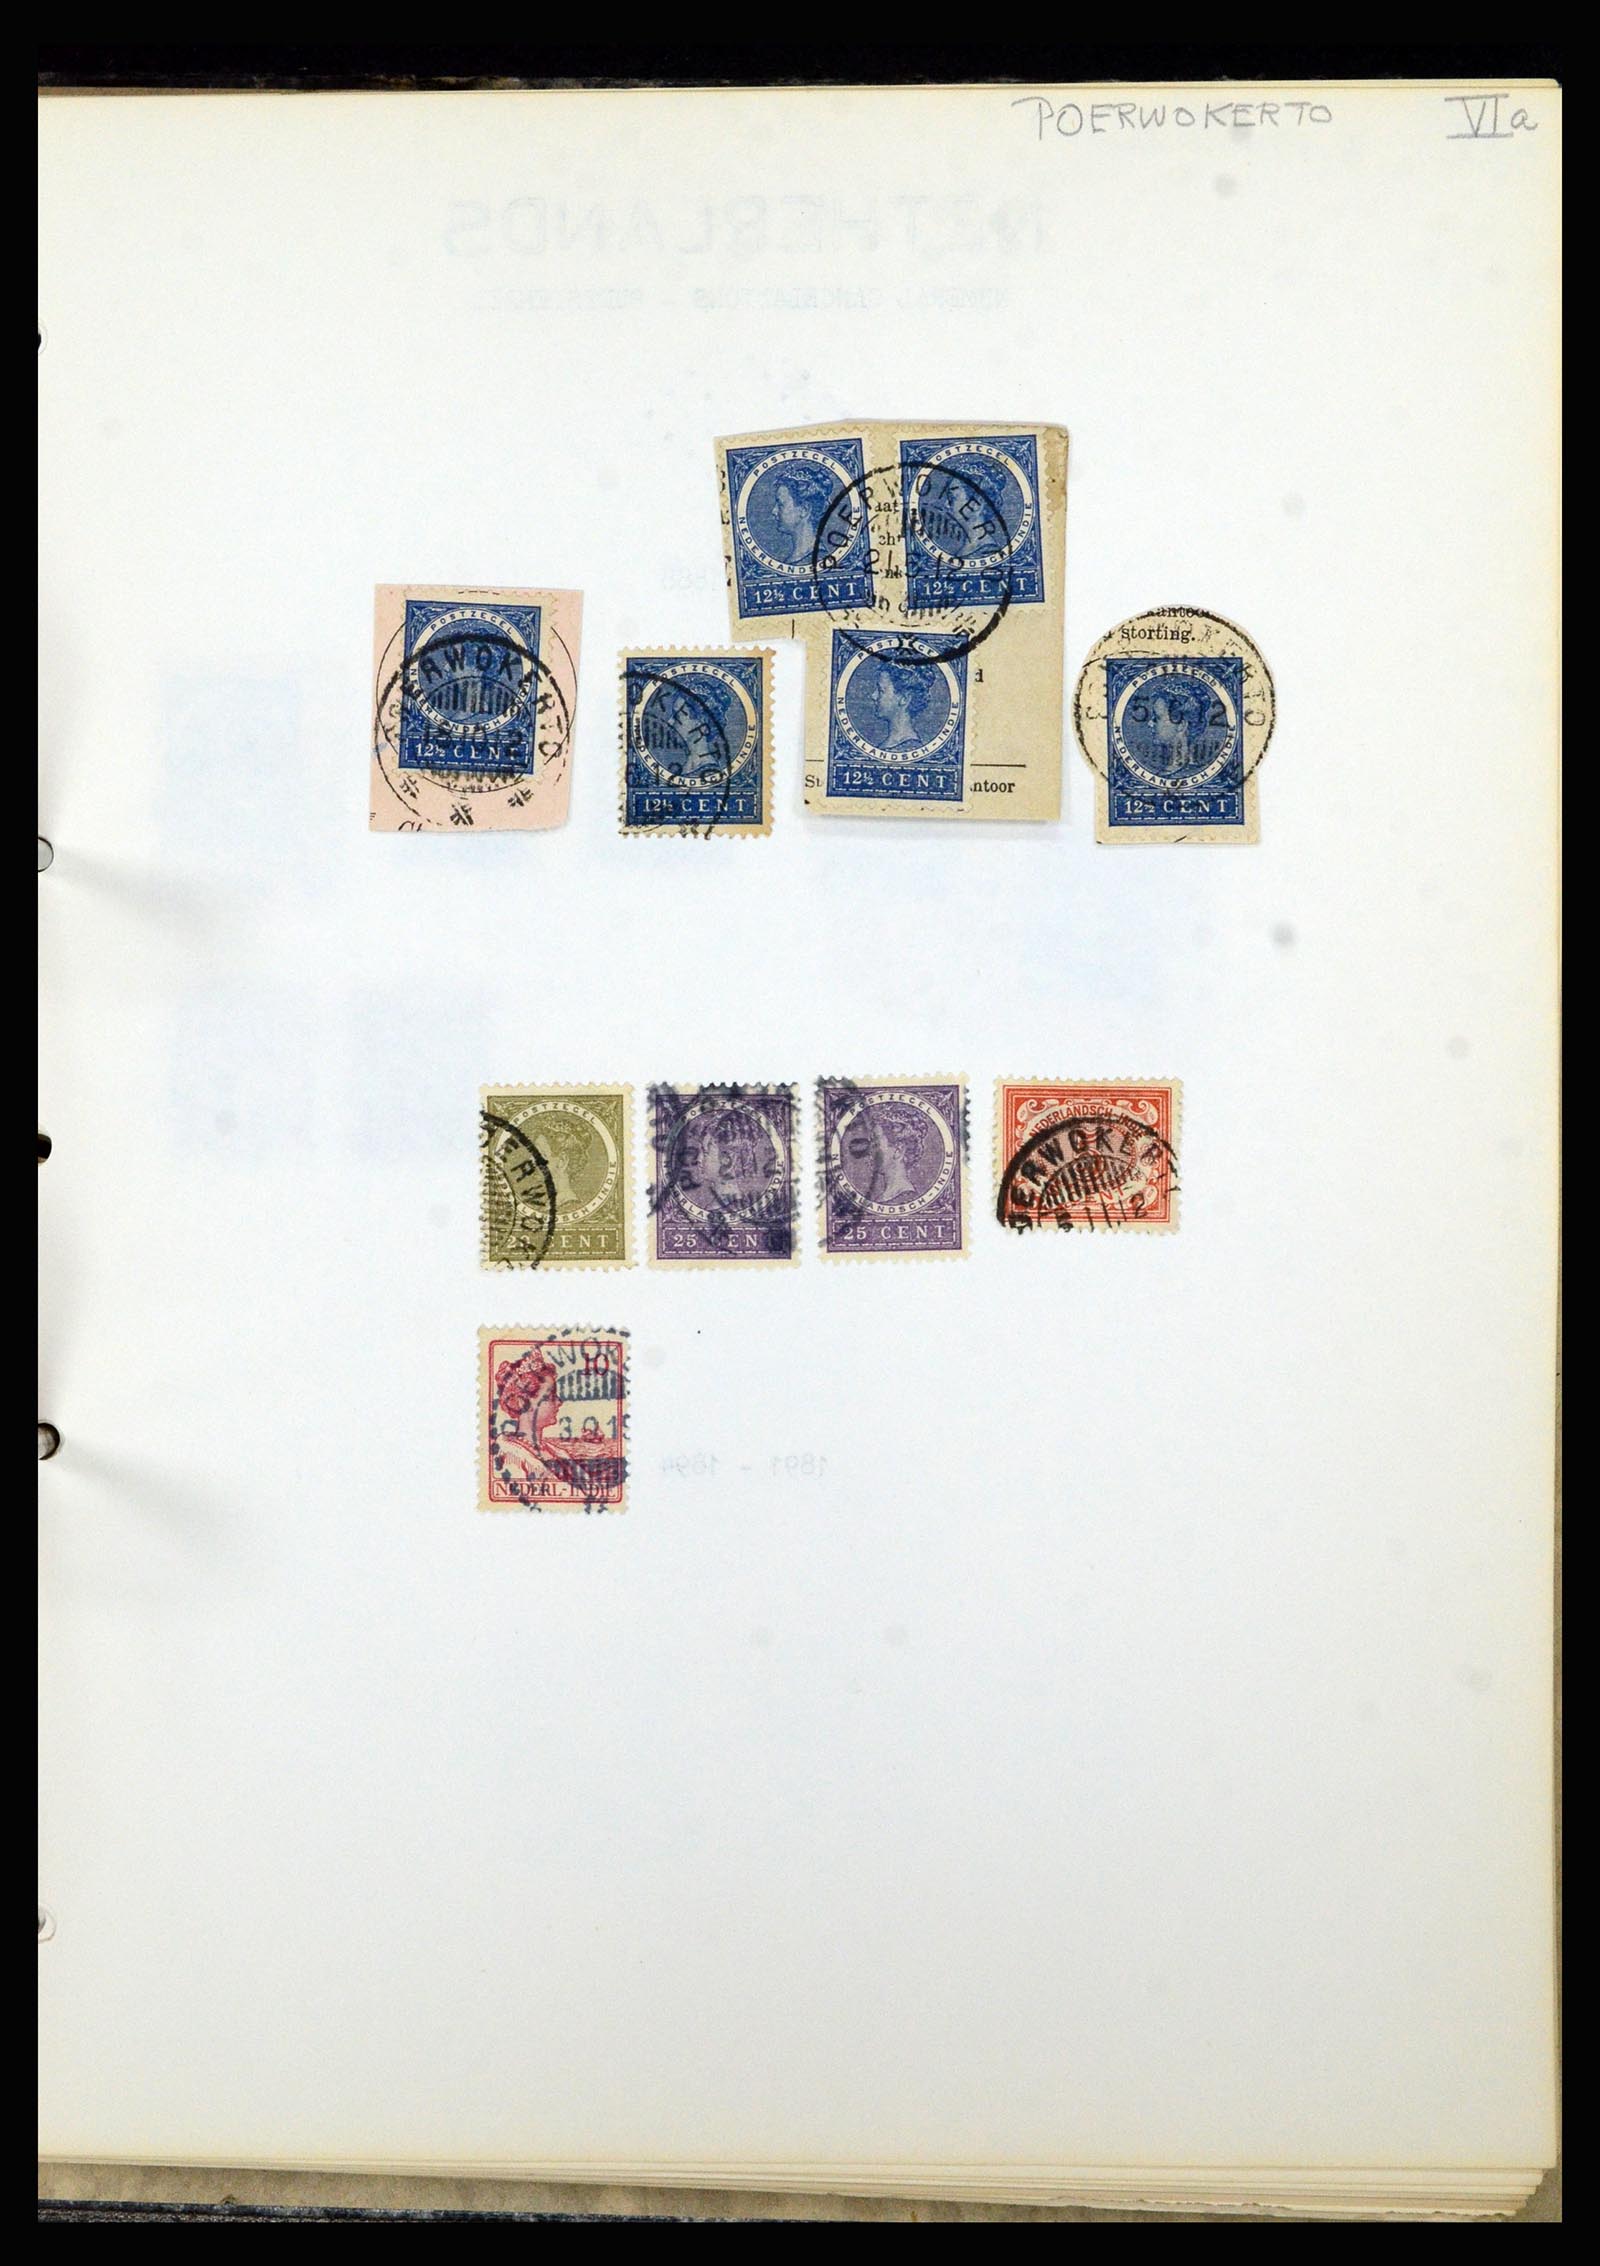 36841 095 - Stamp collection 36841 Dutch east Indies short bar cancels.